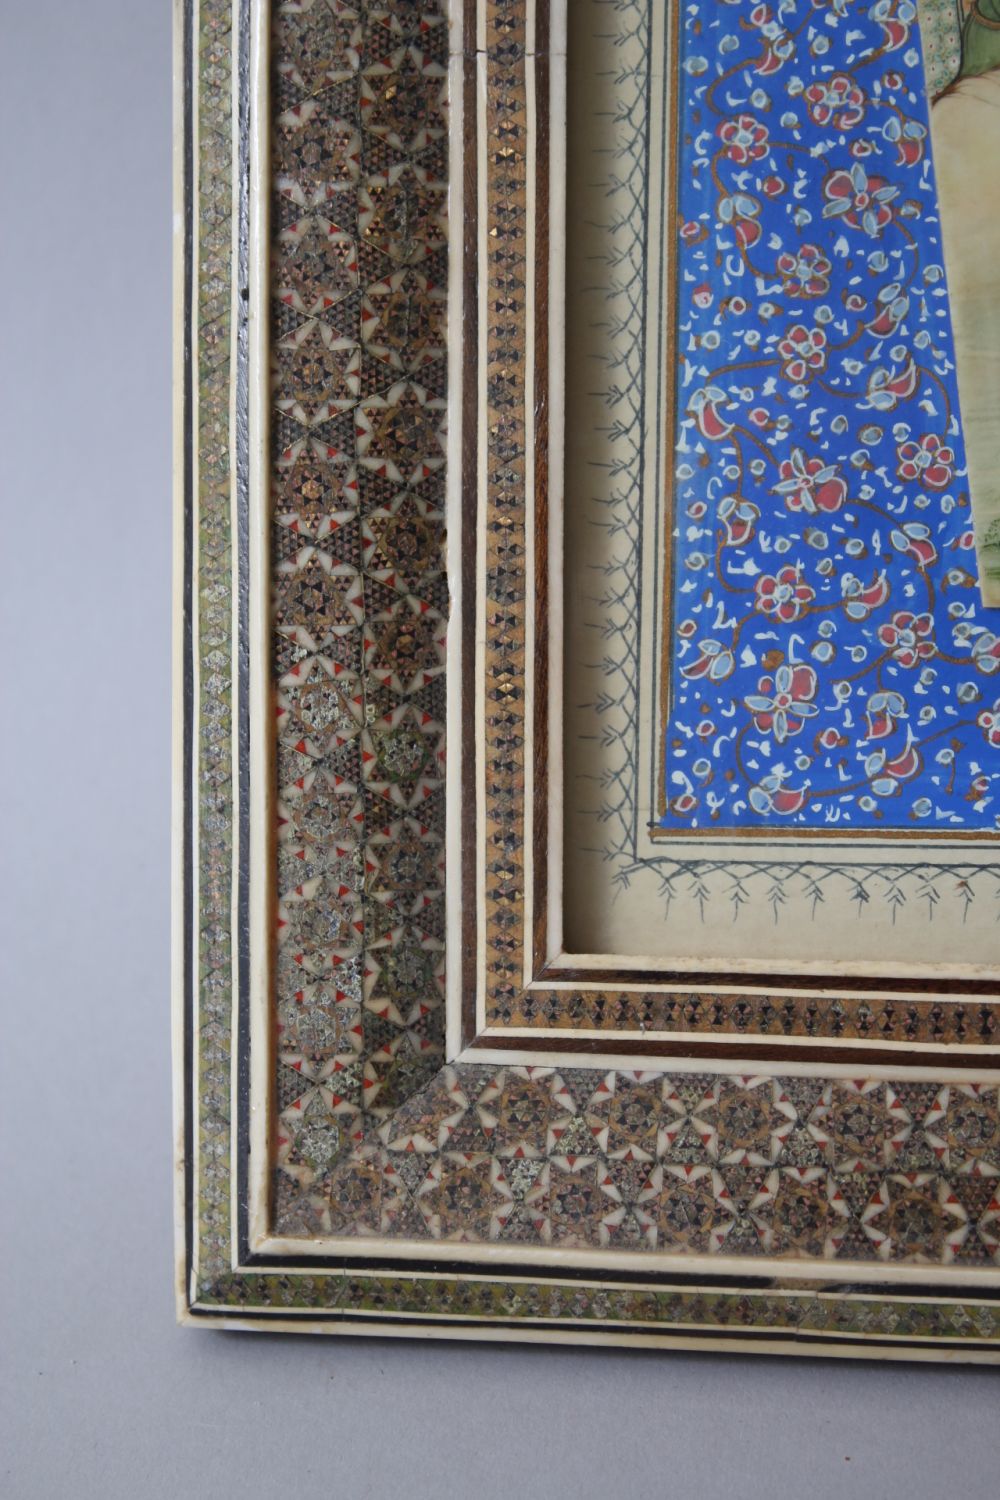 A PERSIAN PAINTING ON IVORY, tents, figures on camels and cows, 10cm x 20cm in a mosaic frame. - Image 3 of 3